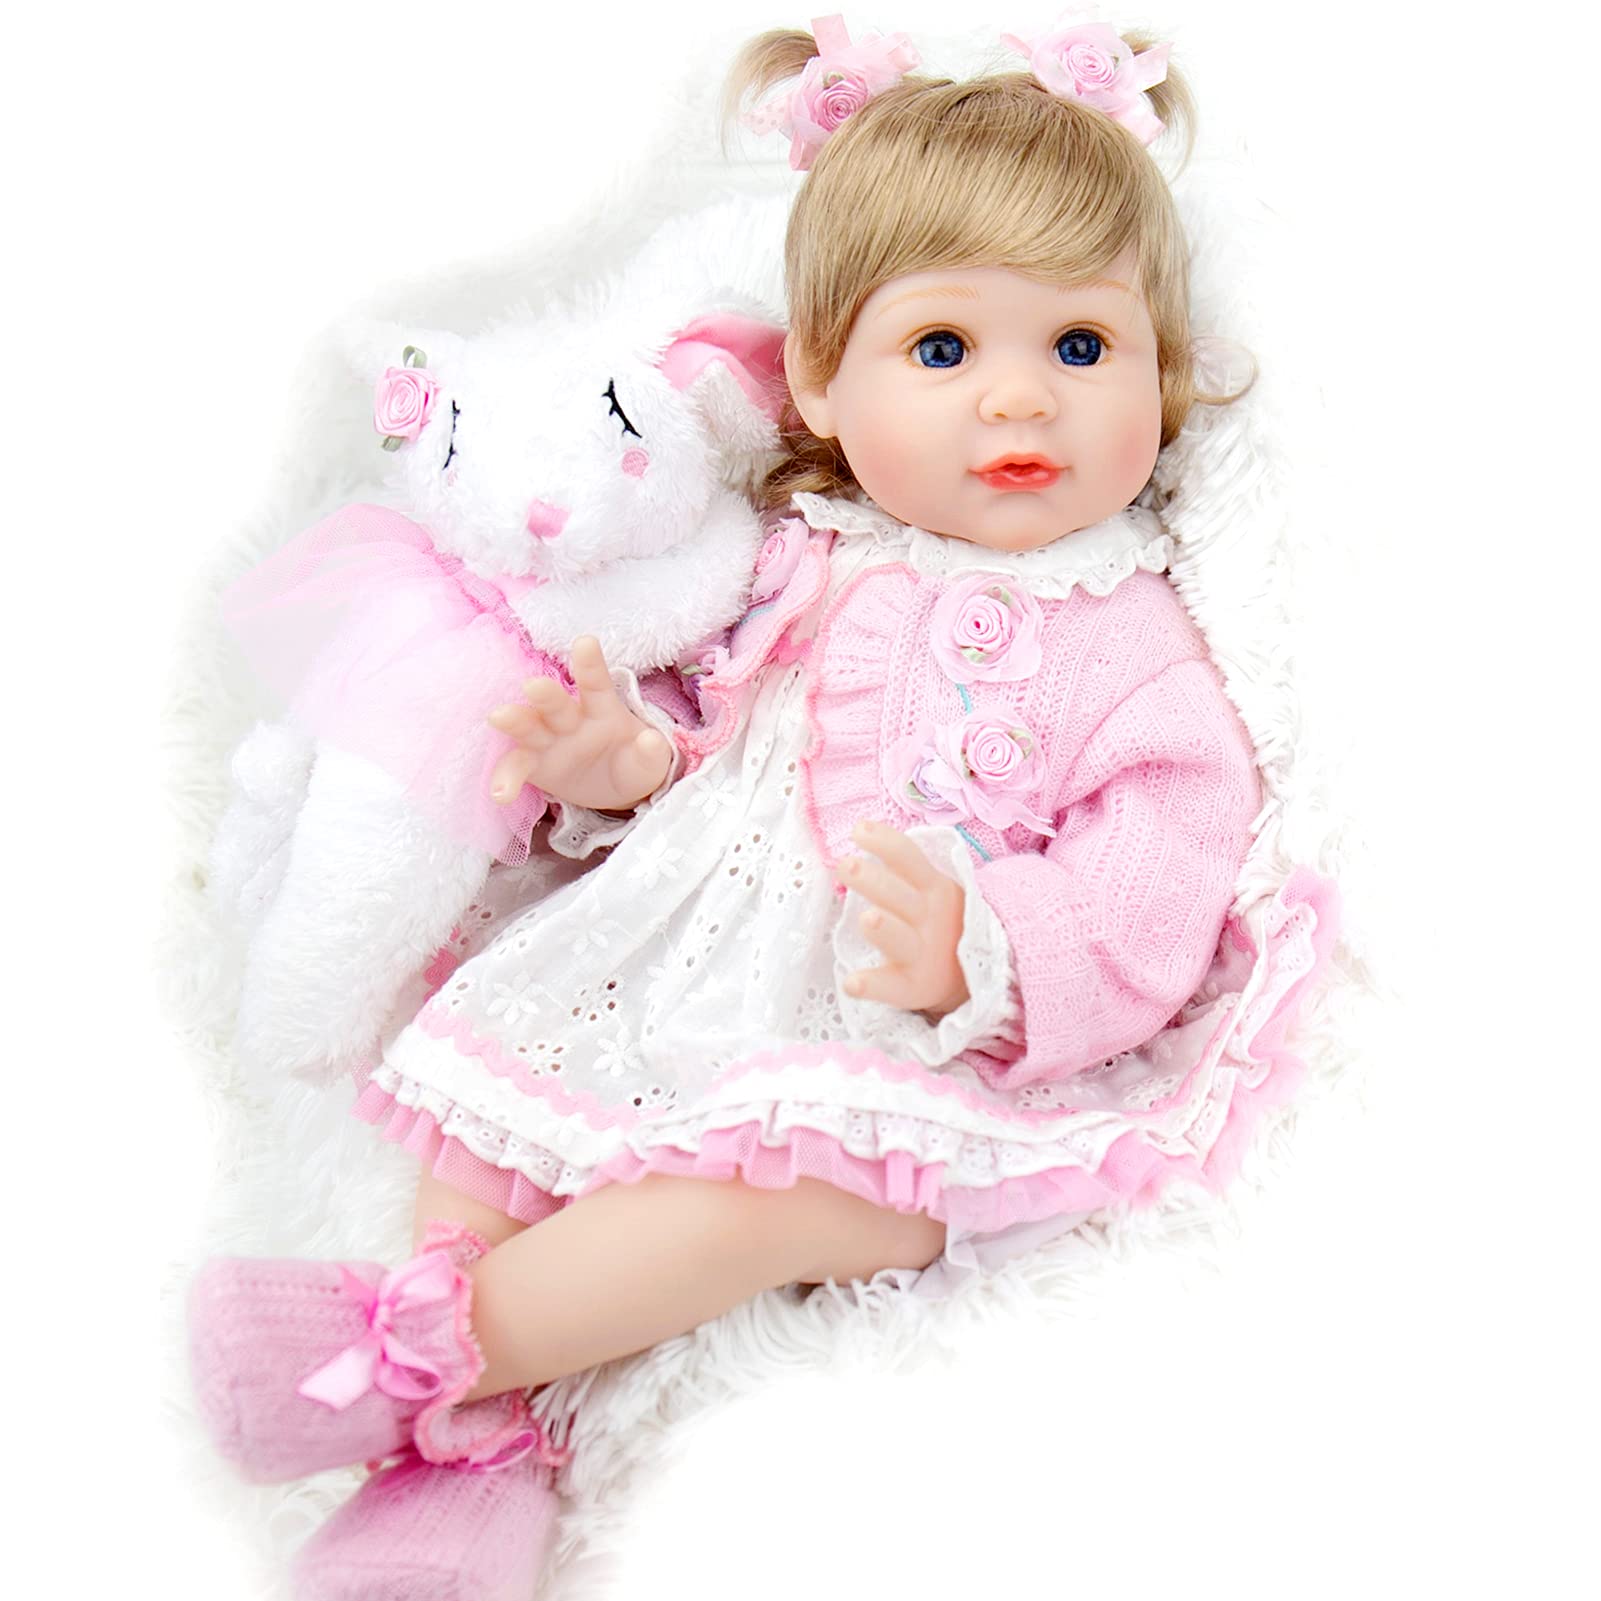 Milidool Reborn Baby Dolls, Realistic Newborn Baby Dolls, 22 Inch Real Life Weighted Cloth Body Baby Dolls Girl With Bunny Toy G